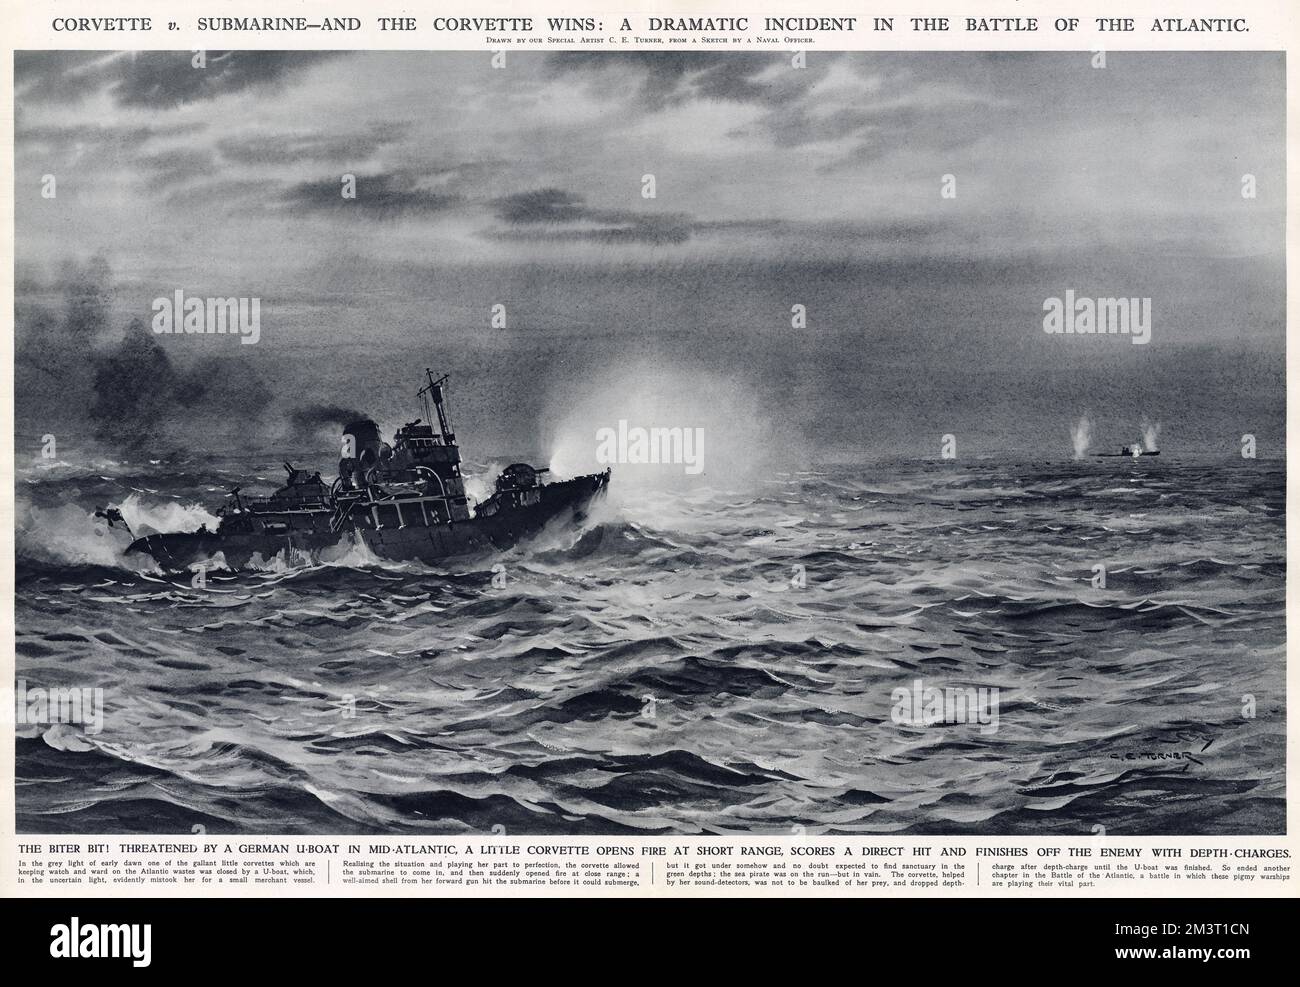 WW2 - Corvette versus submarine and the corvette wins: A dramatic incident in The Battle of the Atlantic     Date: 1941 Stock Photo